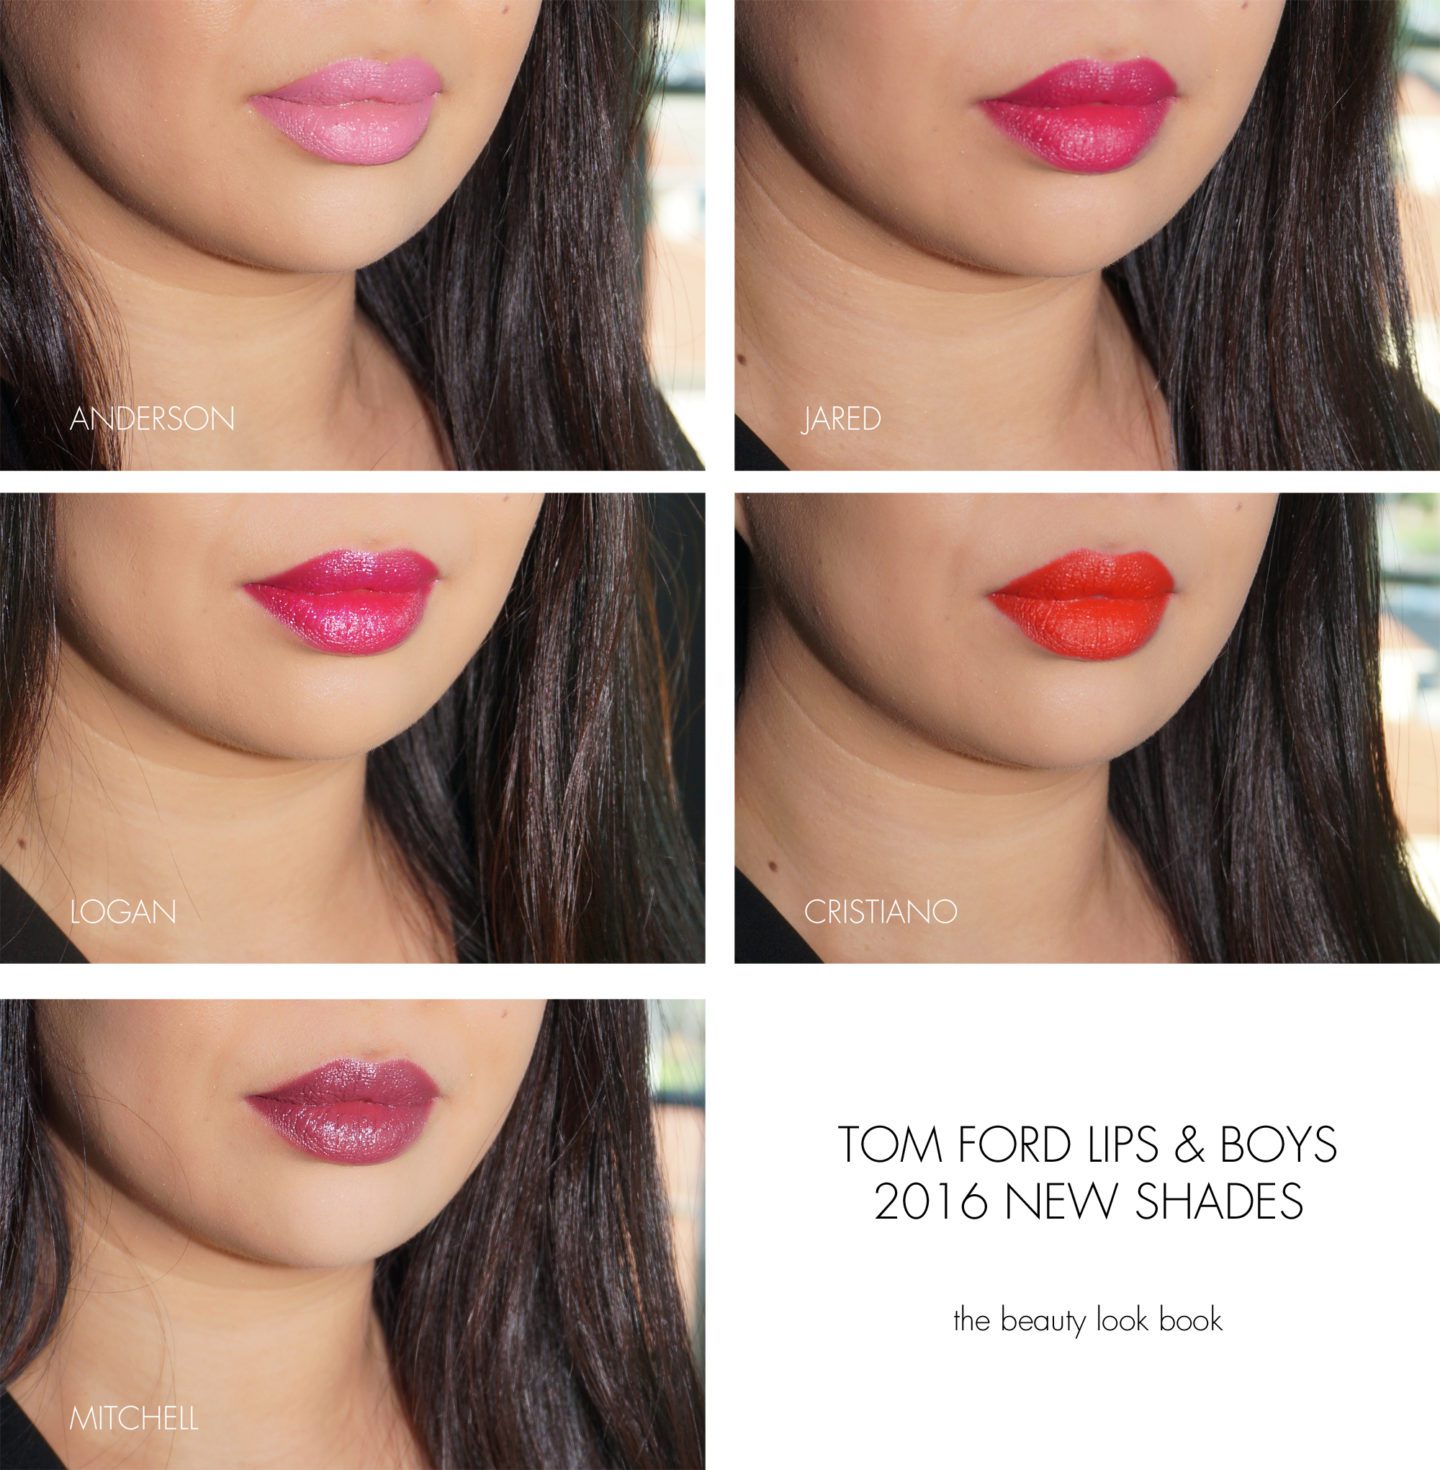 Tom Ford Lips and Boys Anderson, Jared, Logan, Cristiano, Mitchell